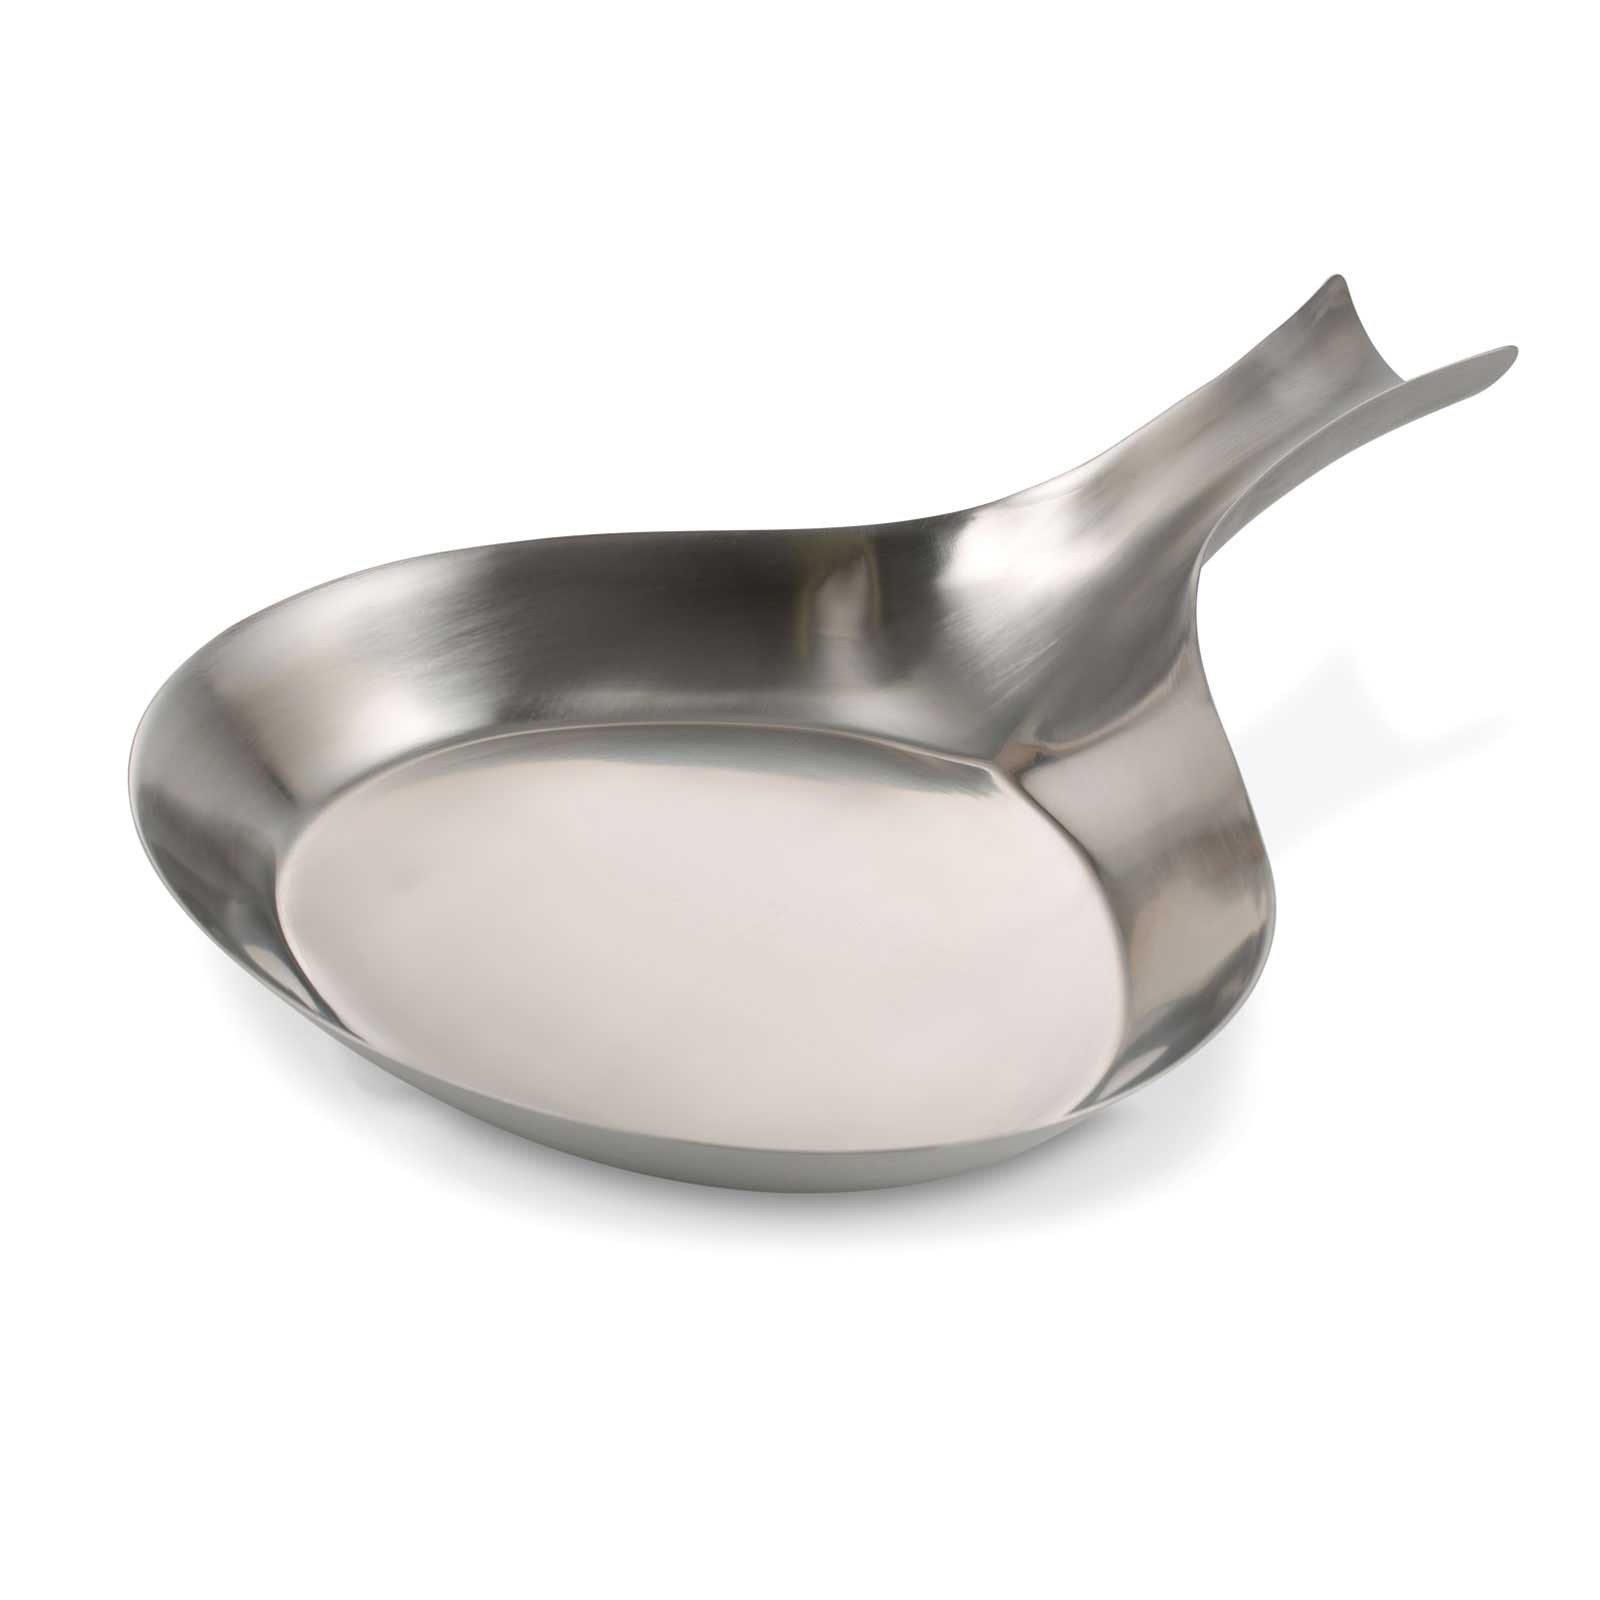 Bon Chef 5112 Stainless Steel Serving Skillet with Brush Finish, 10" Dia.